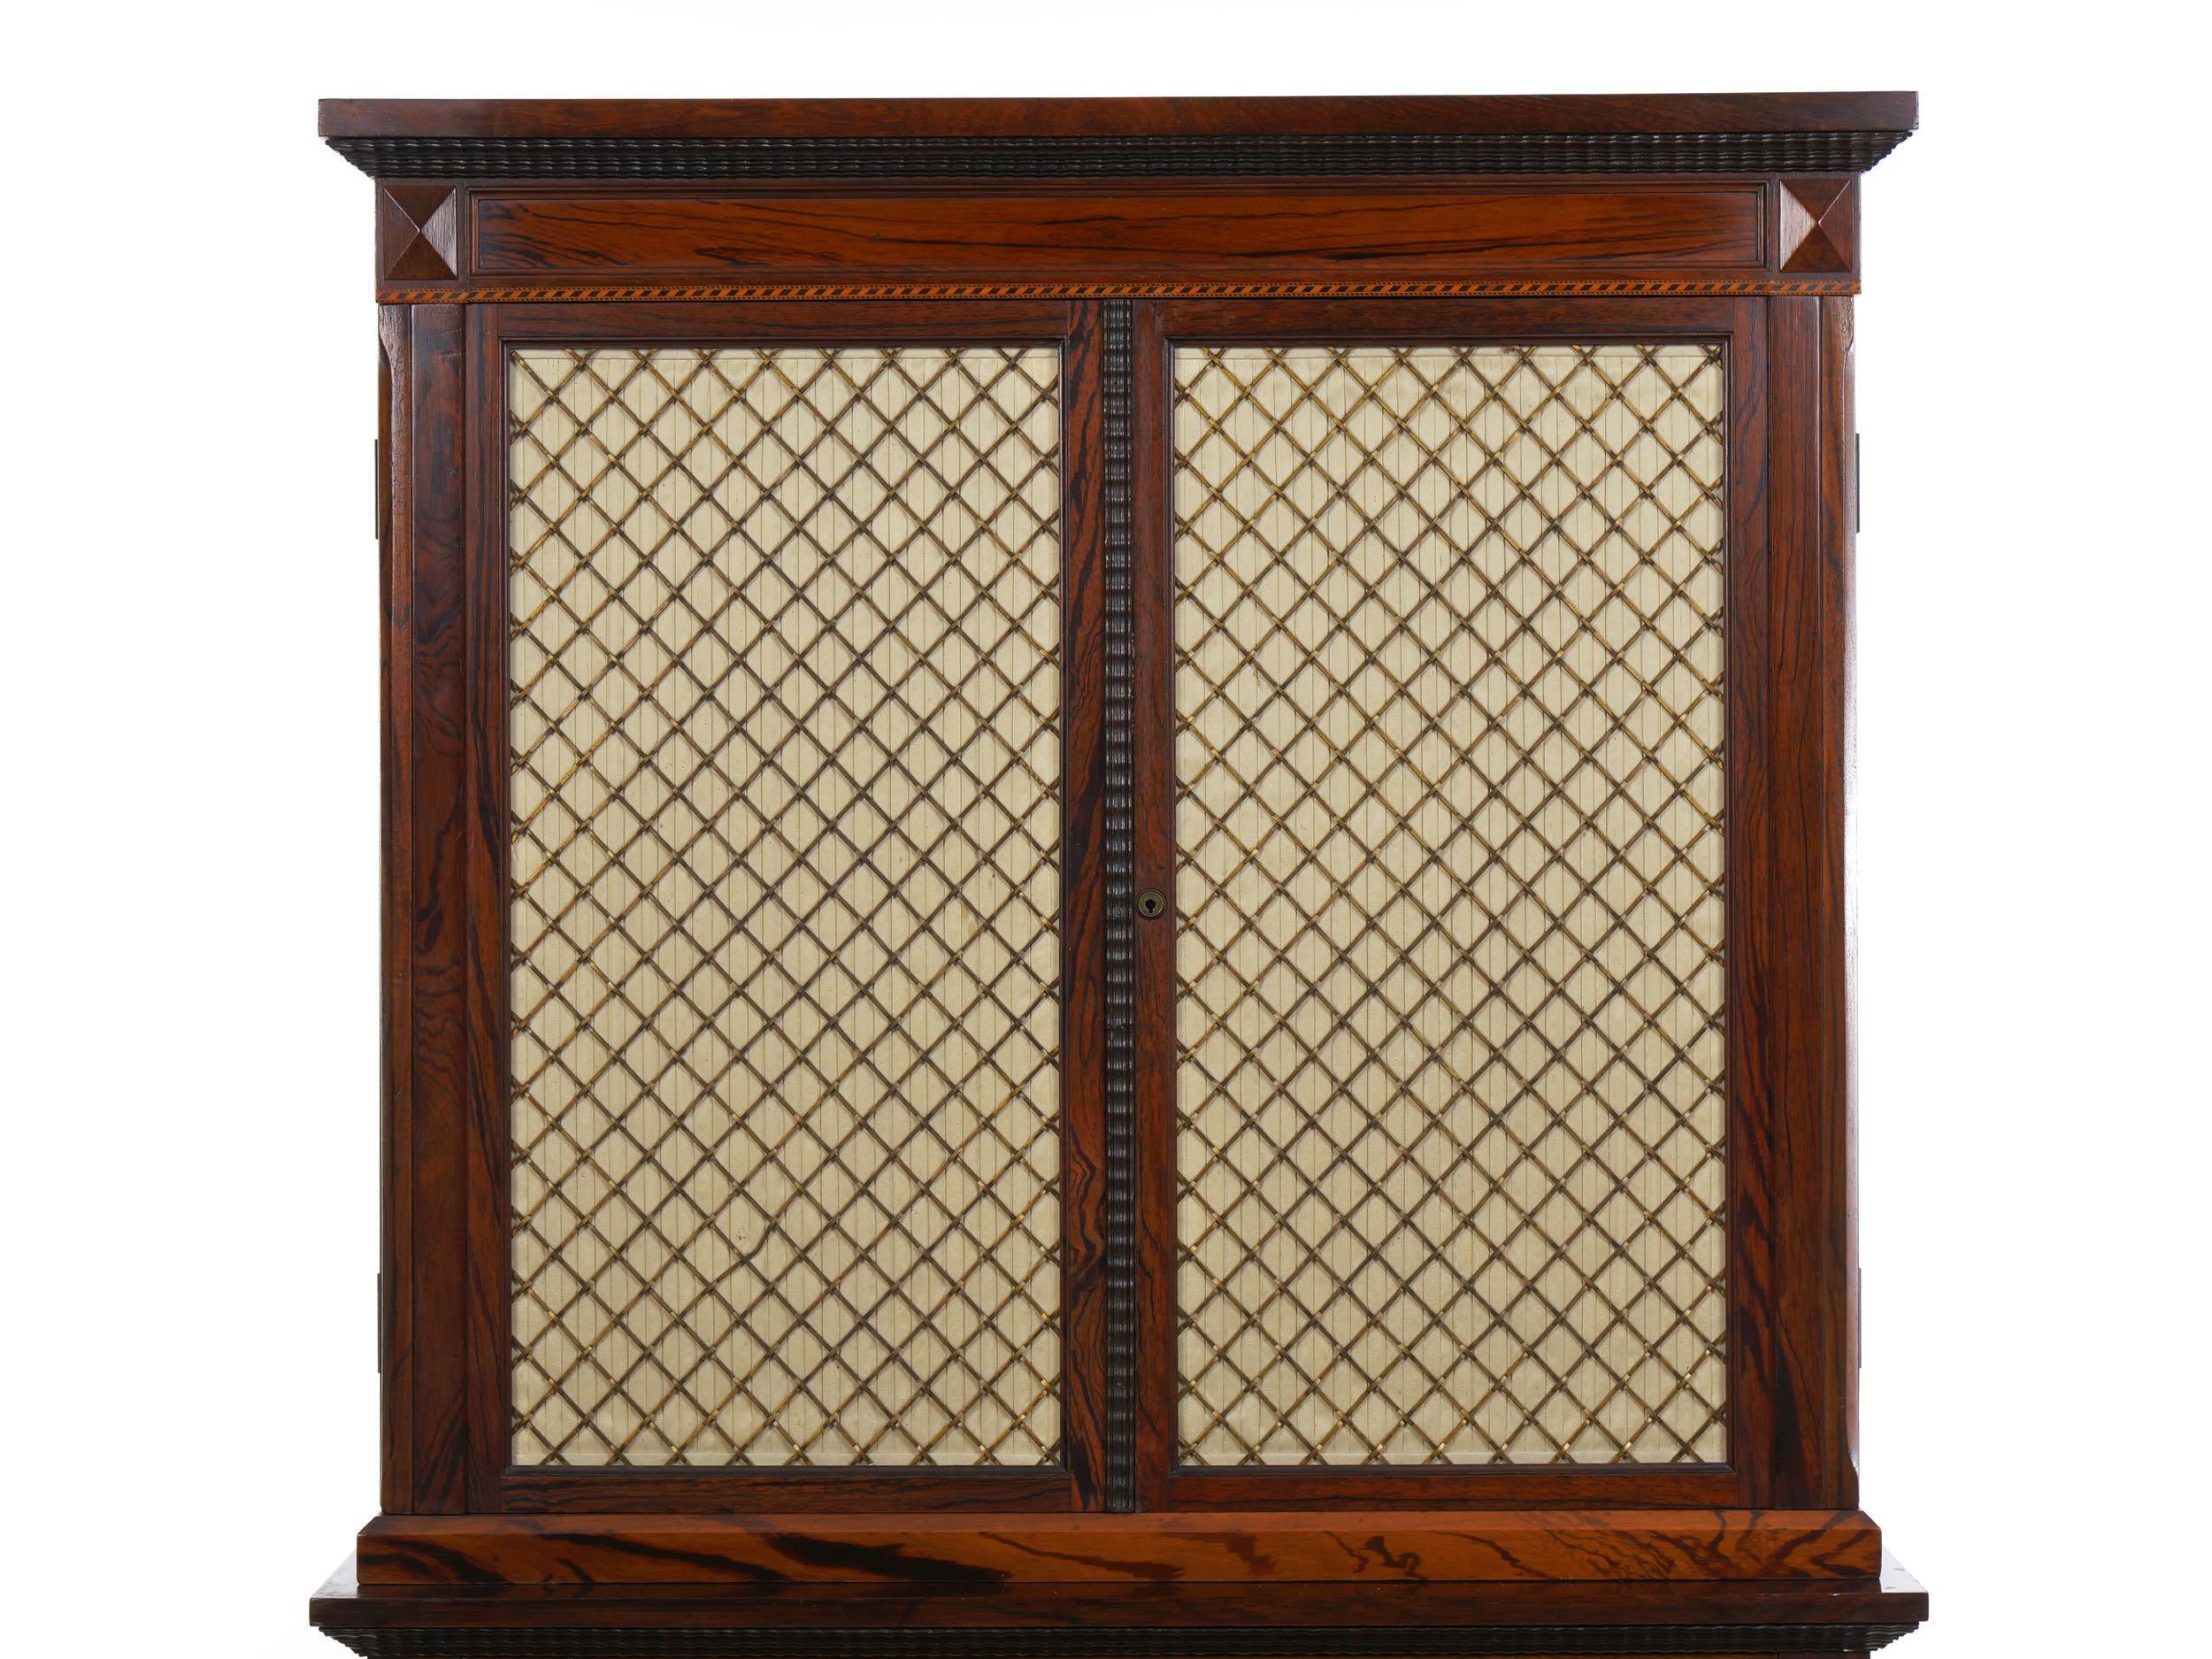 19th Century English Rosewood Antique Humidor Cabinet by Mellier & Co, London, circa 1880 For Sale